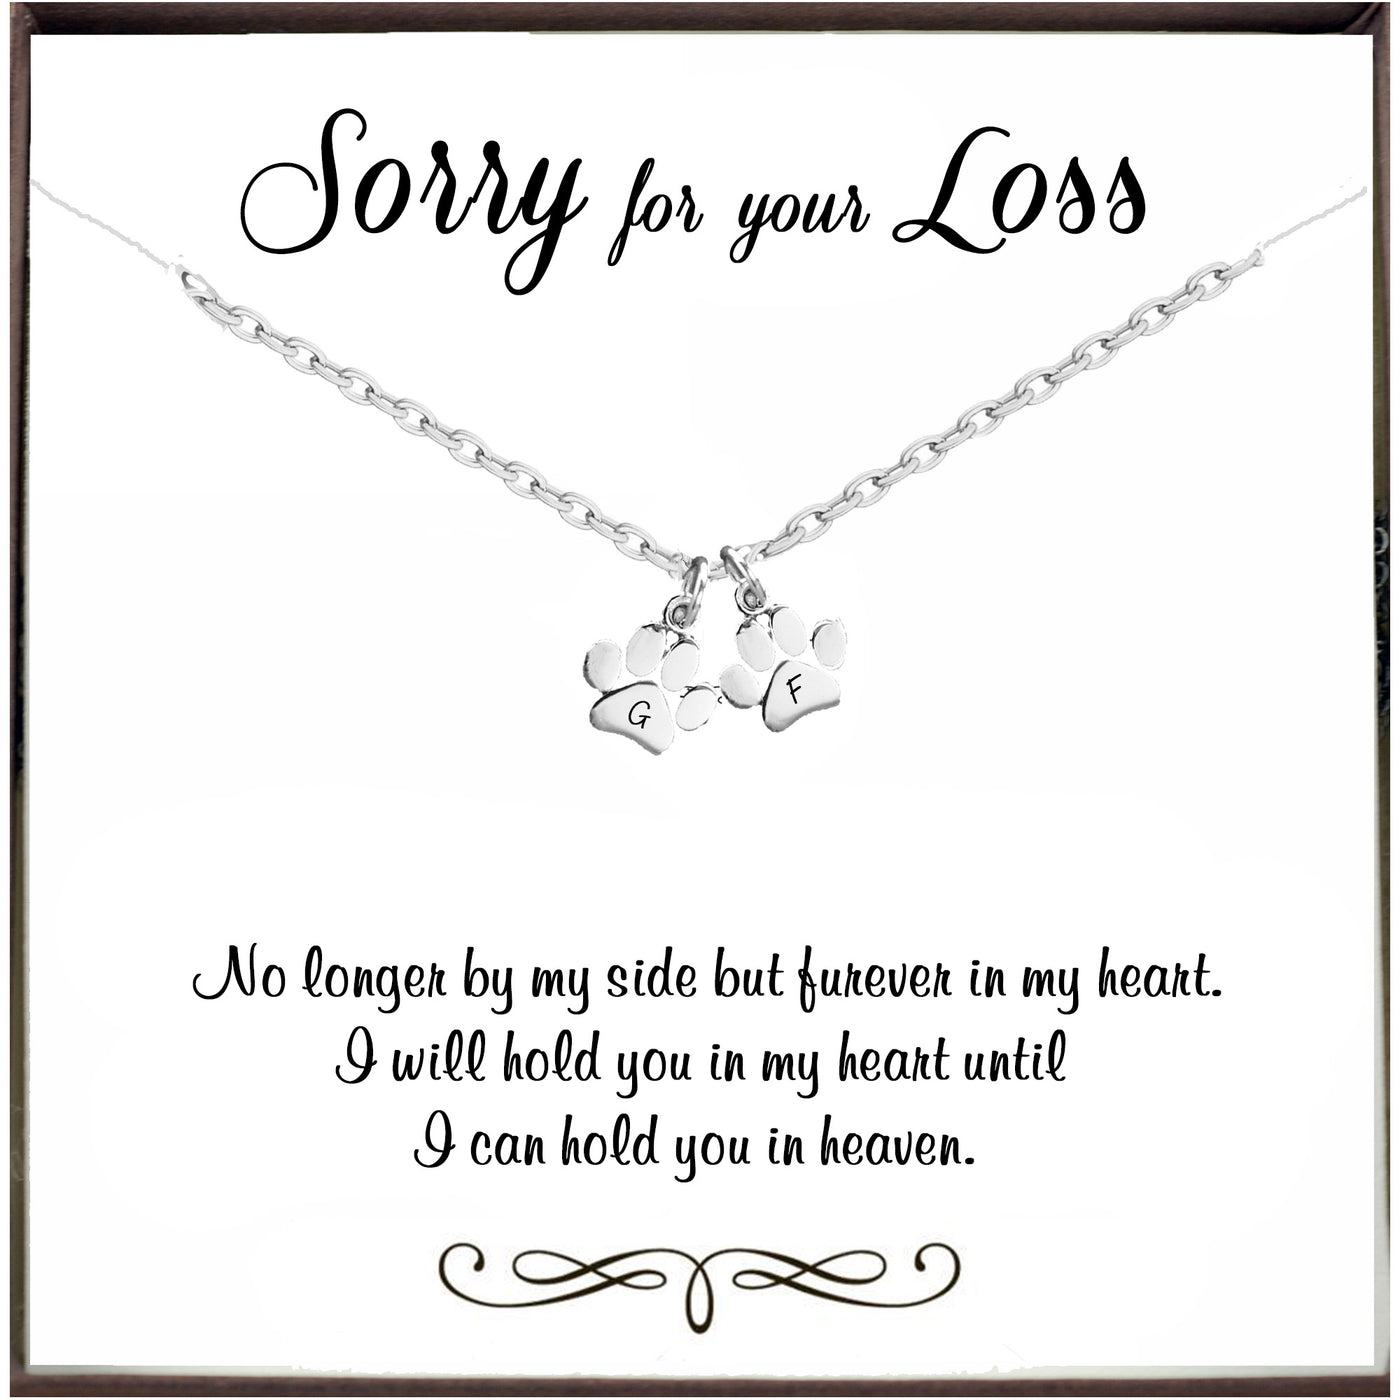 Personalized Pet Memorial Necklace with Dog Paws - Godfullness